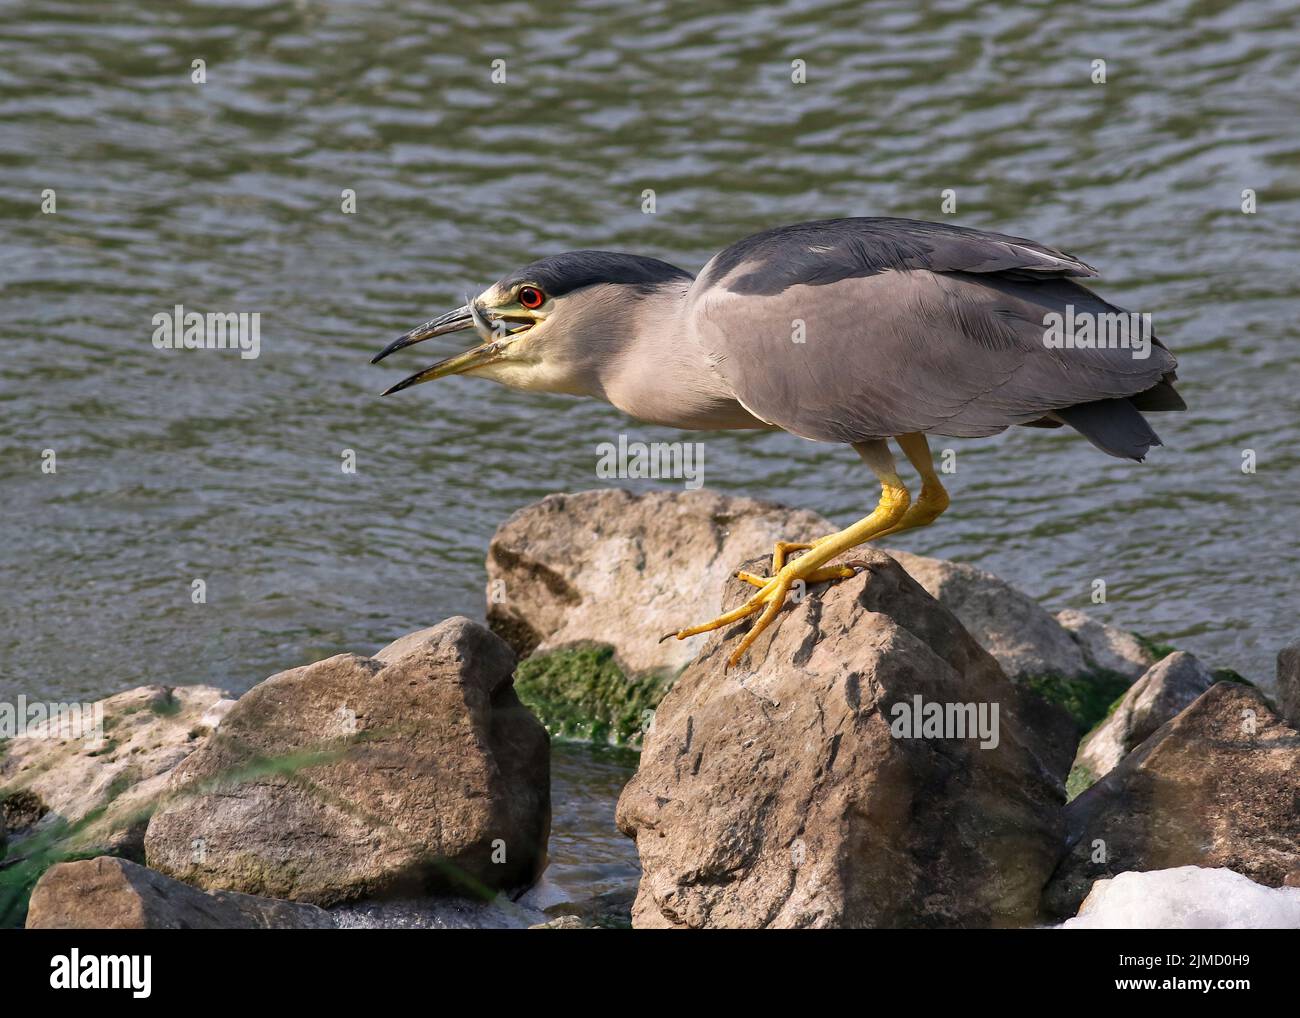 A Black-crowned Night Heron atop rocks by a stream, about to swallow a freshly caught fish. Viewed at close range. Stock Photo